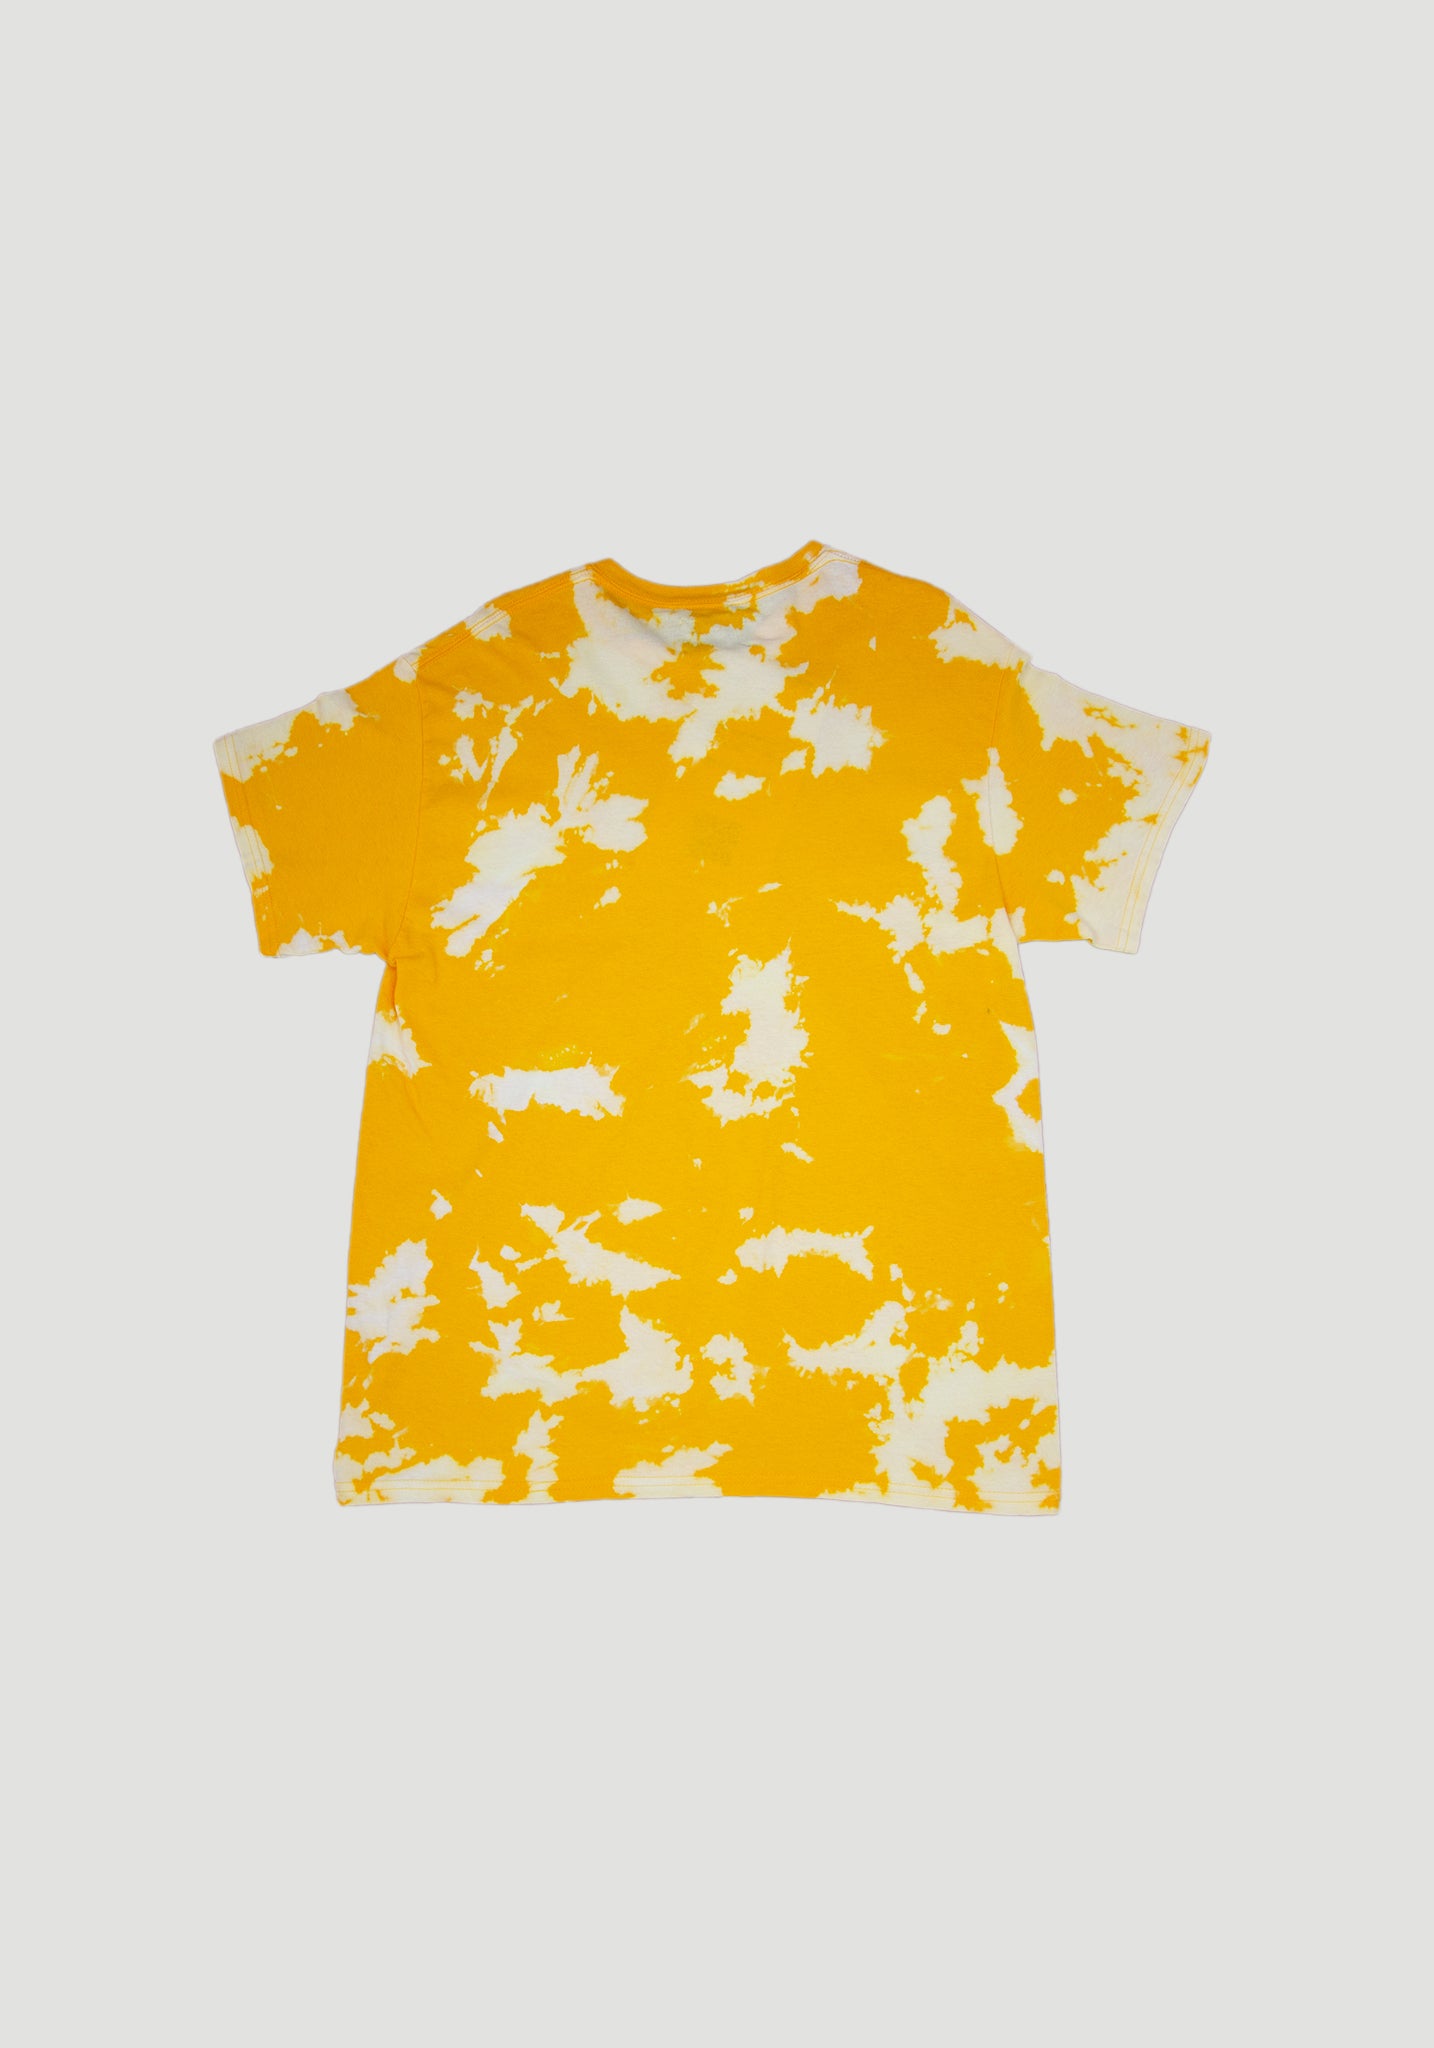 HDL Shirt Sunkissed Edition #09 (M)